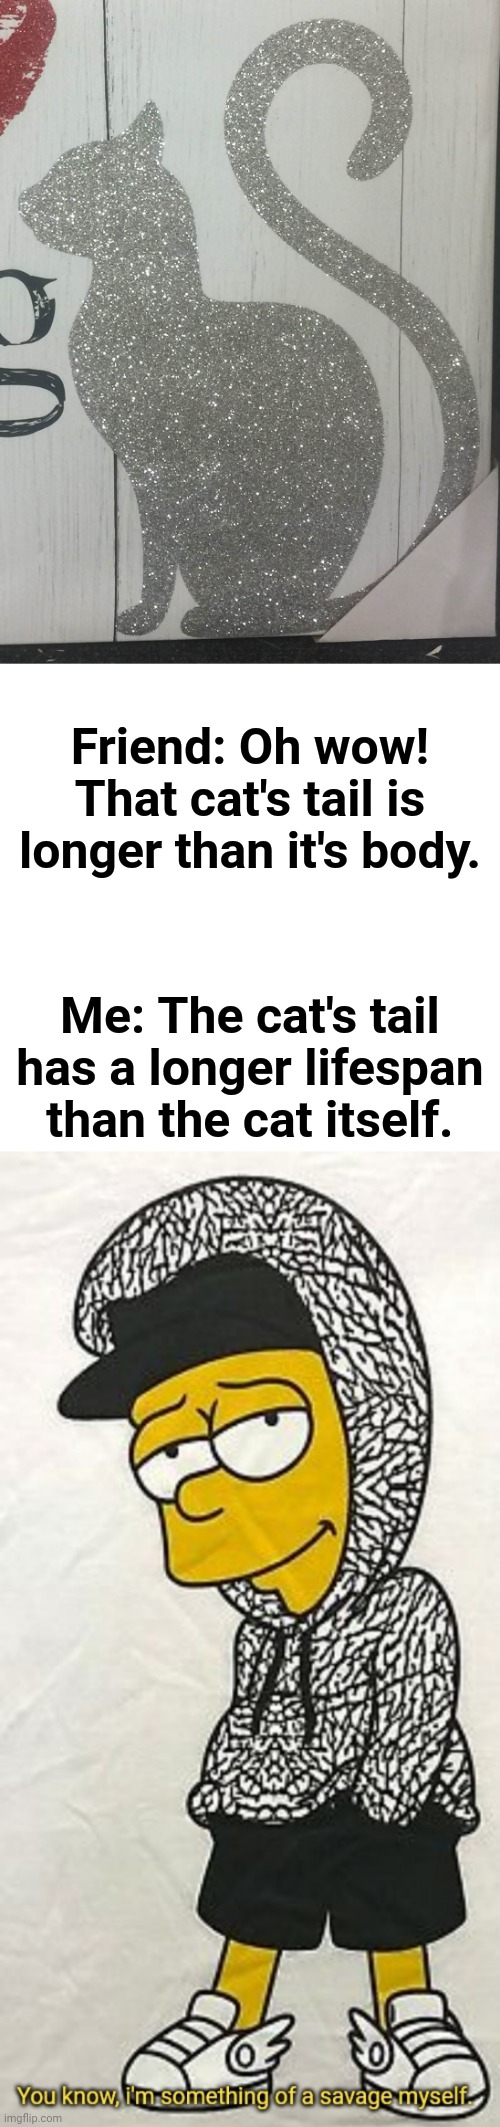 Cat | Friend: Oh wow! That cat's tail is longer than it's body. Me: The cat's tail has a longer lifespan than the cat itself. | image tagged in you know i'm something of a savage myself,roasts,roasted,roast,memes,cat | made w/ Imgflip meme maker